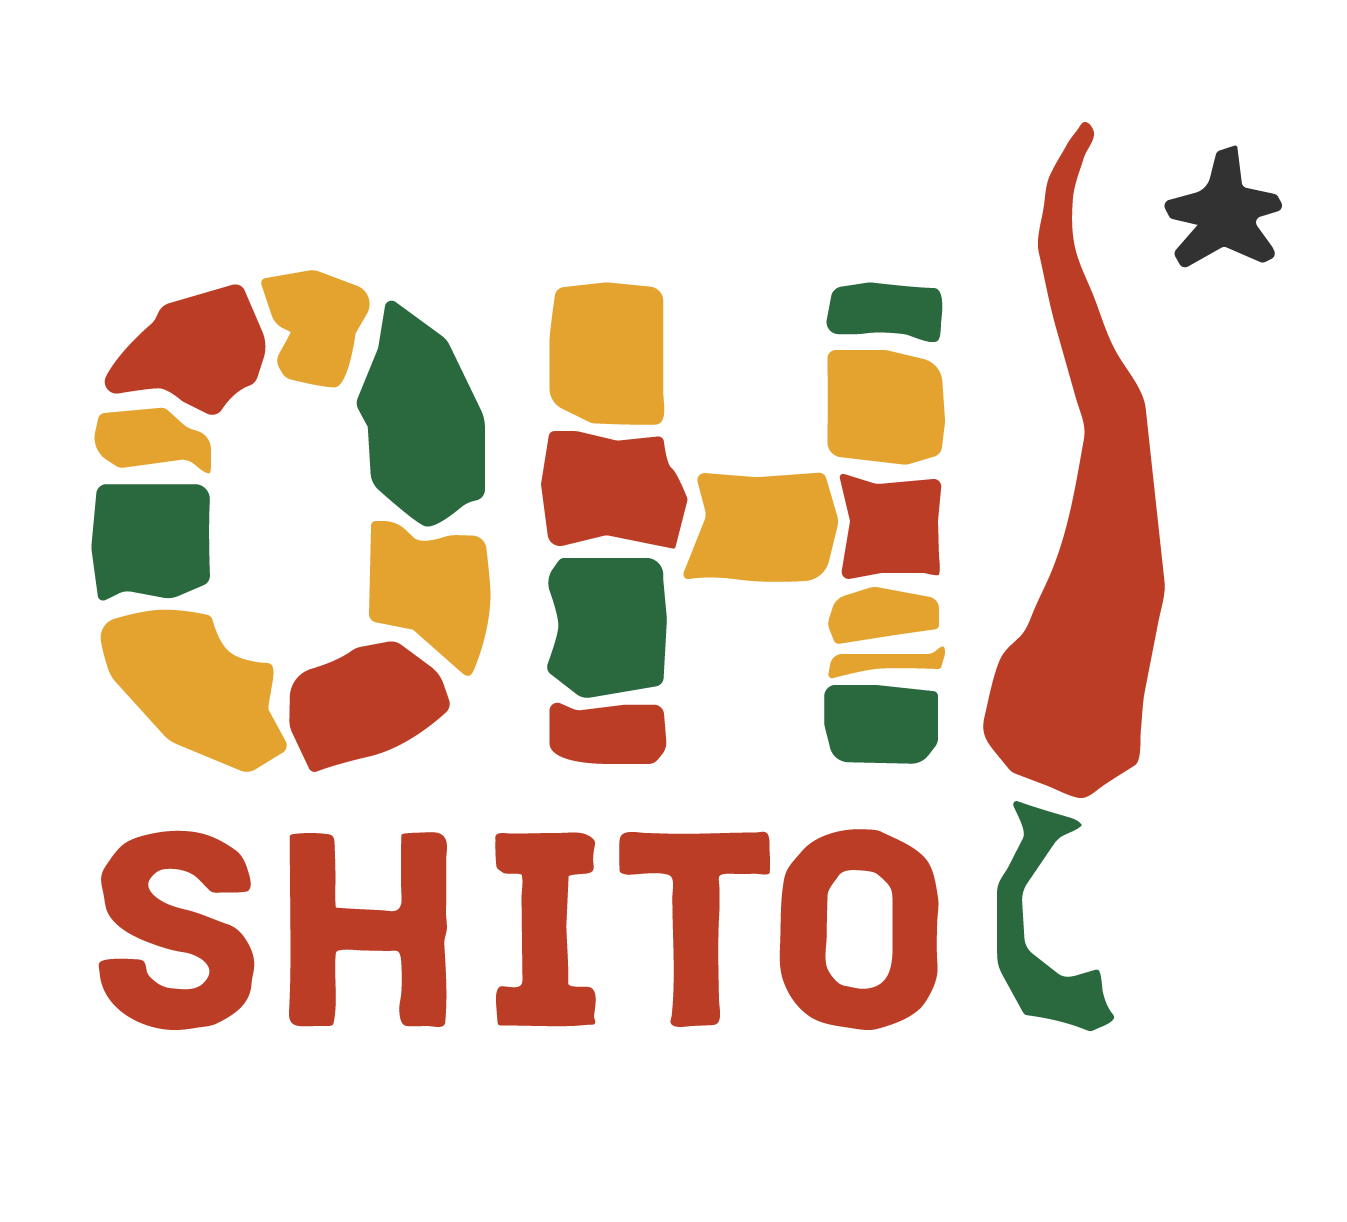 Shito Pepper Sauce Recipe - Savory Thoughts